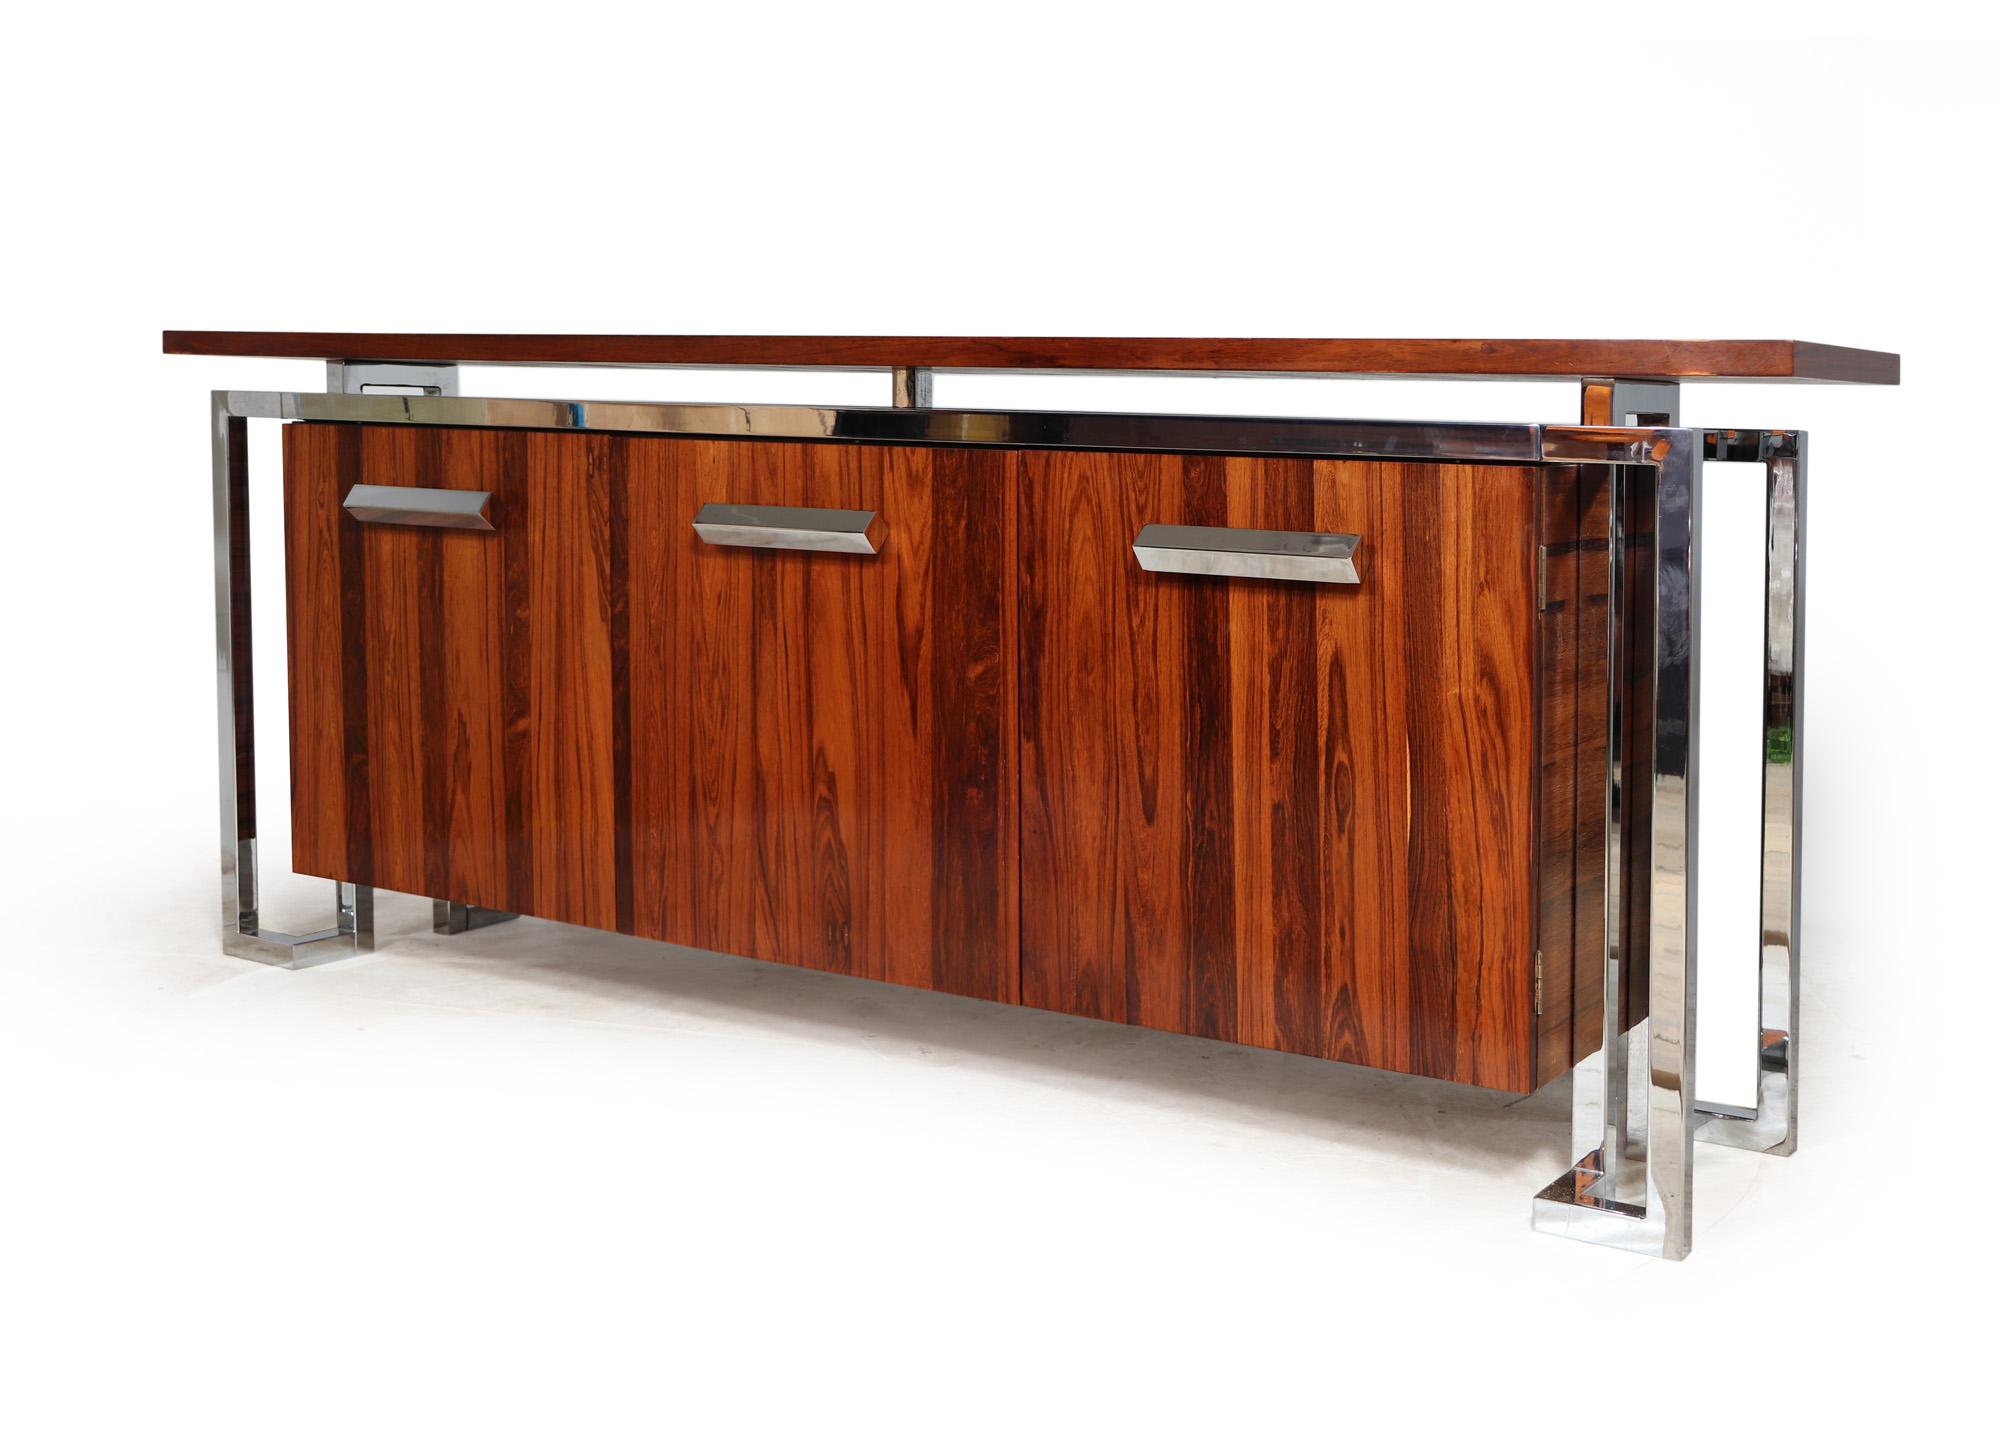 MANDARIN SIDEBOARD BY PIEFF
A mid century rosewood and chrome sideboard from the high end Mandarin range it has tree doors with glass adjustable height shelves and two internal drawers above chromed sure steel supports the sideboard has been part